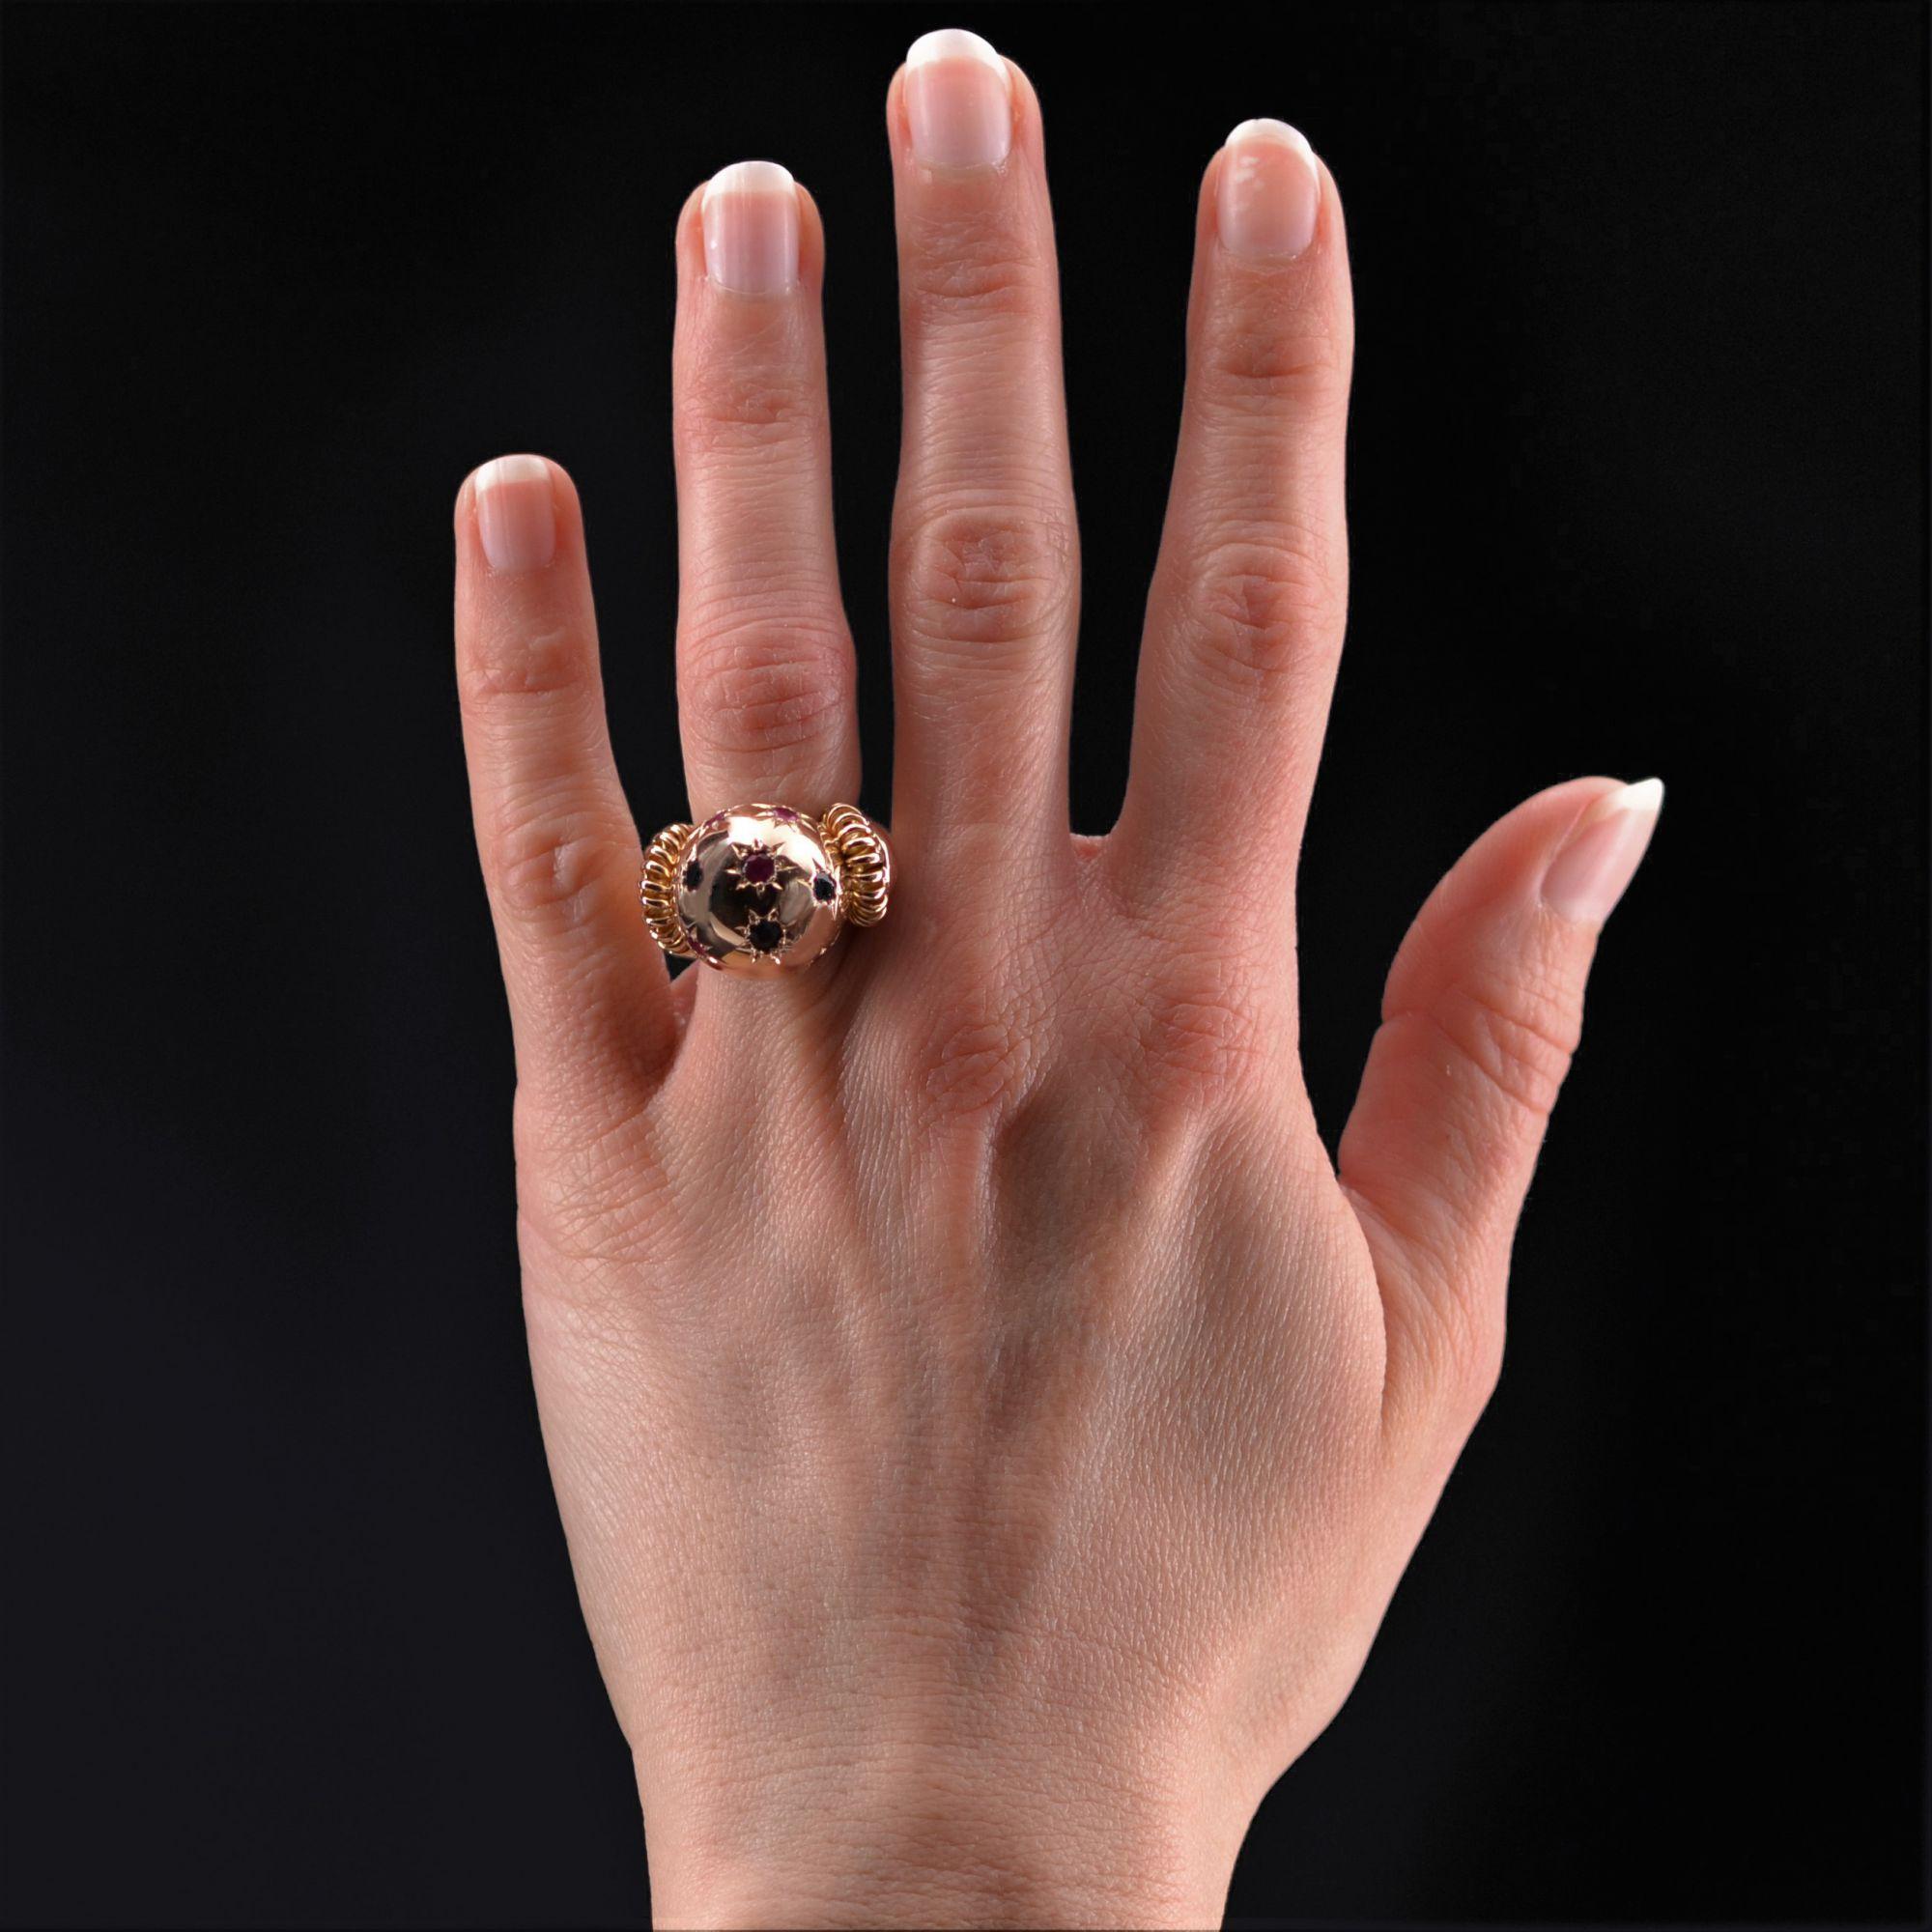 Ring in 18 karat rose gold, own hallmark.
Icon of the 1950's, this ring is set with 5 round rubies and 4 round sapphires in star settings. On either side of the head, the start of the ring is composed of an openwork gold spiral.
Total weight of the